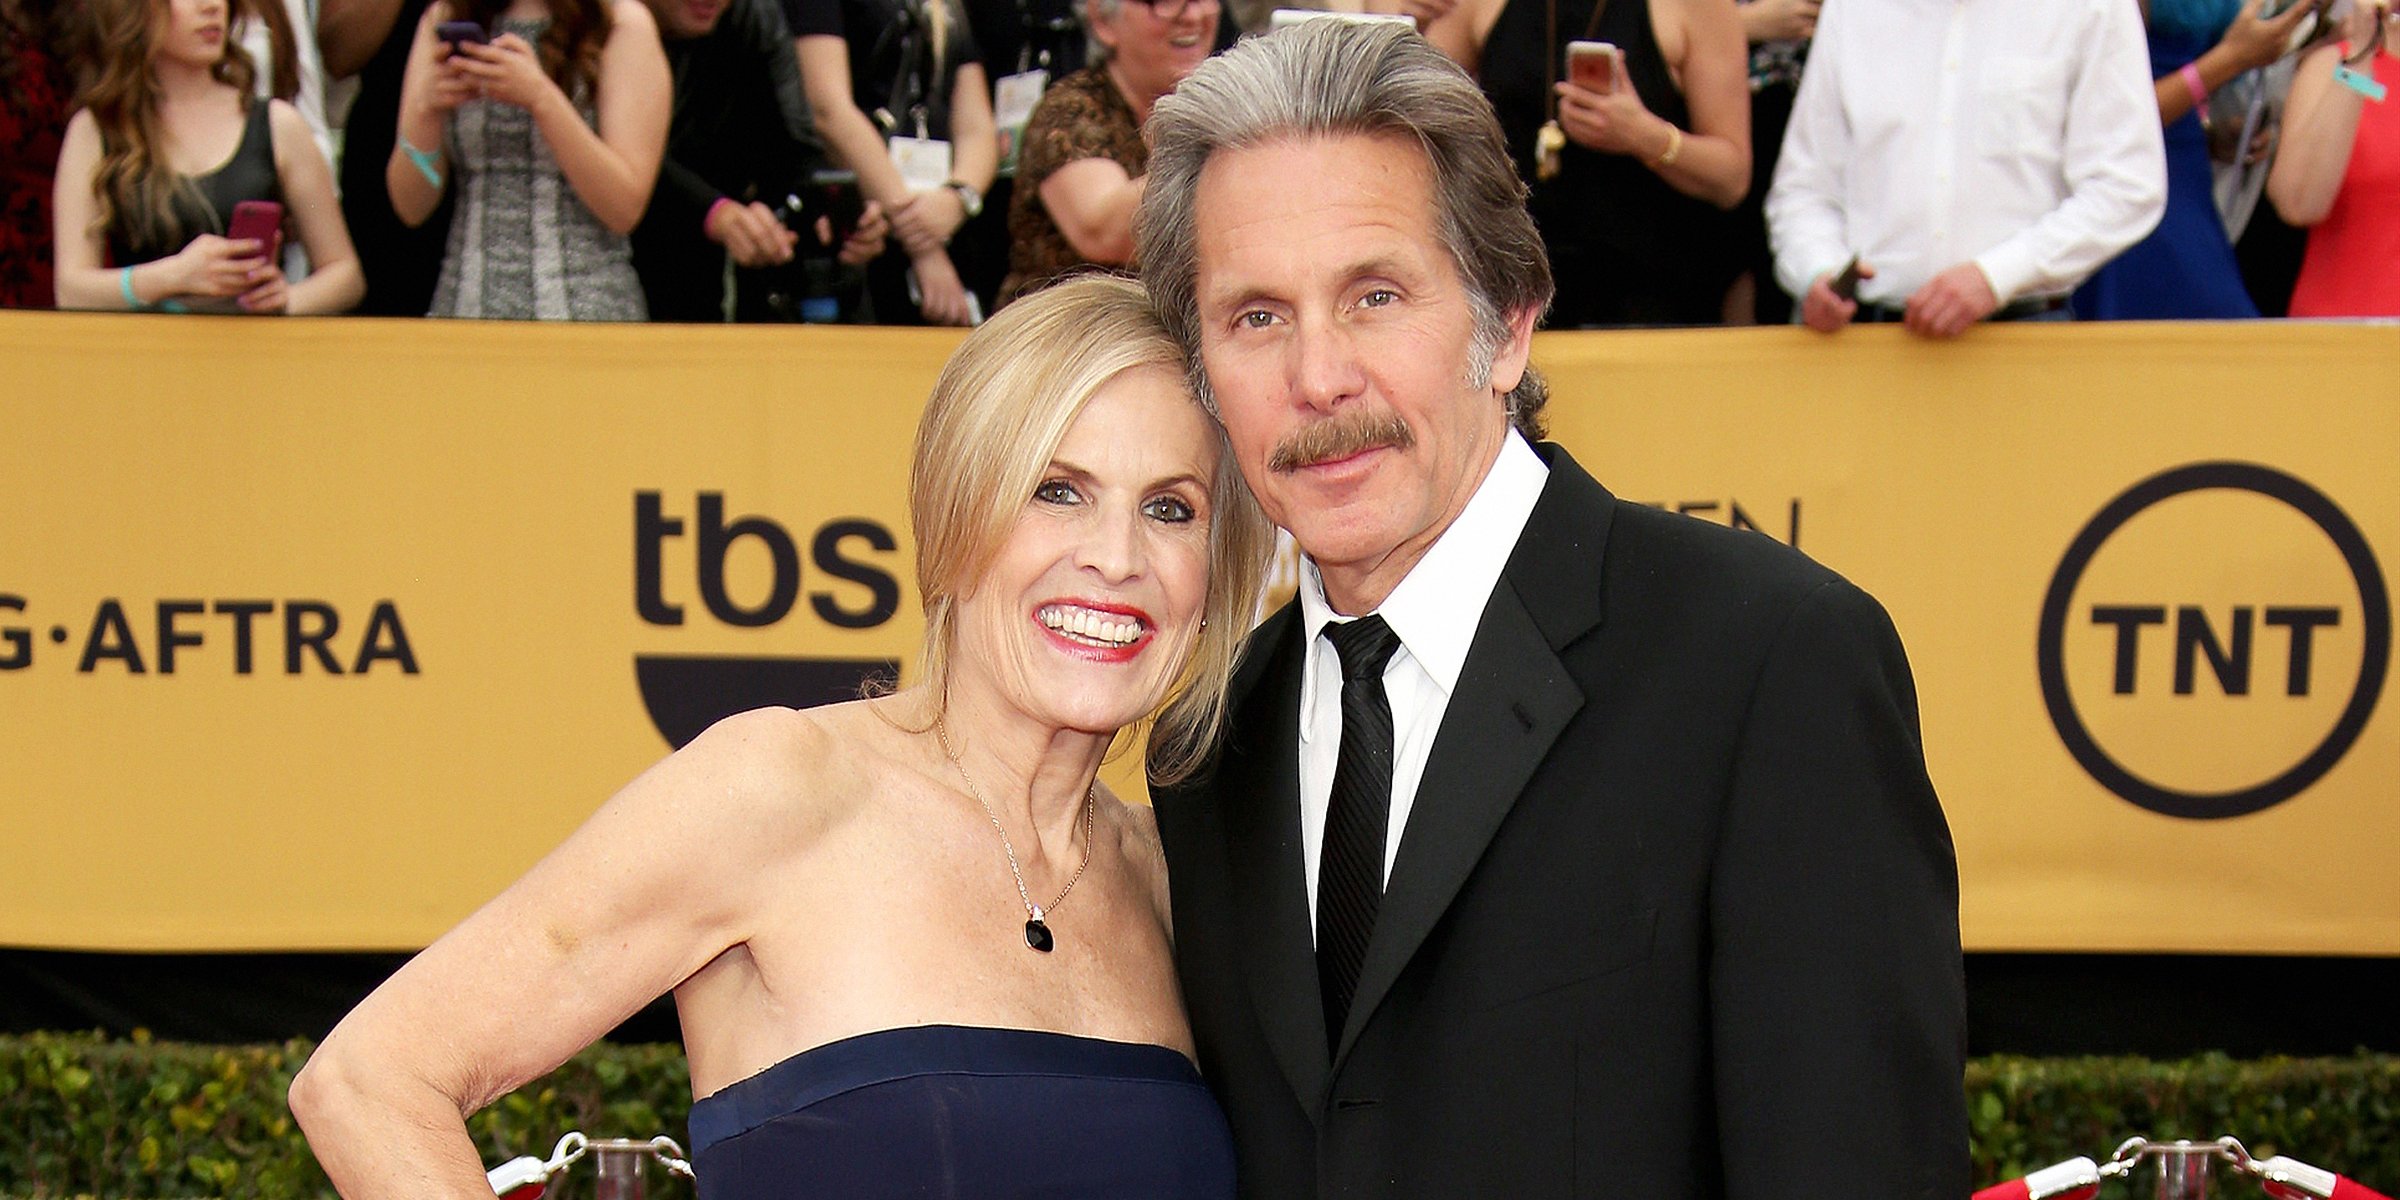 Teddi Siddall and Gary Cole | Source: Getty Images